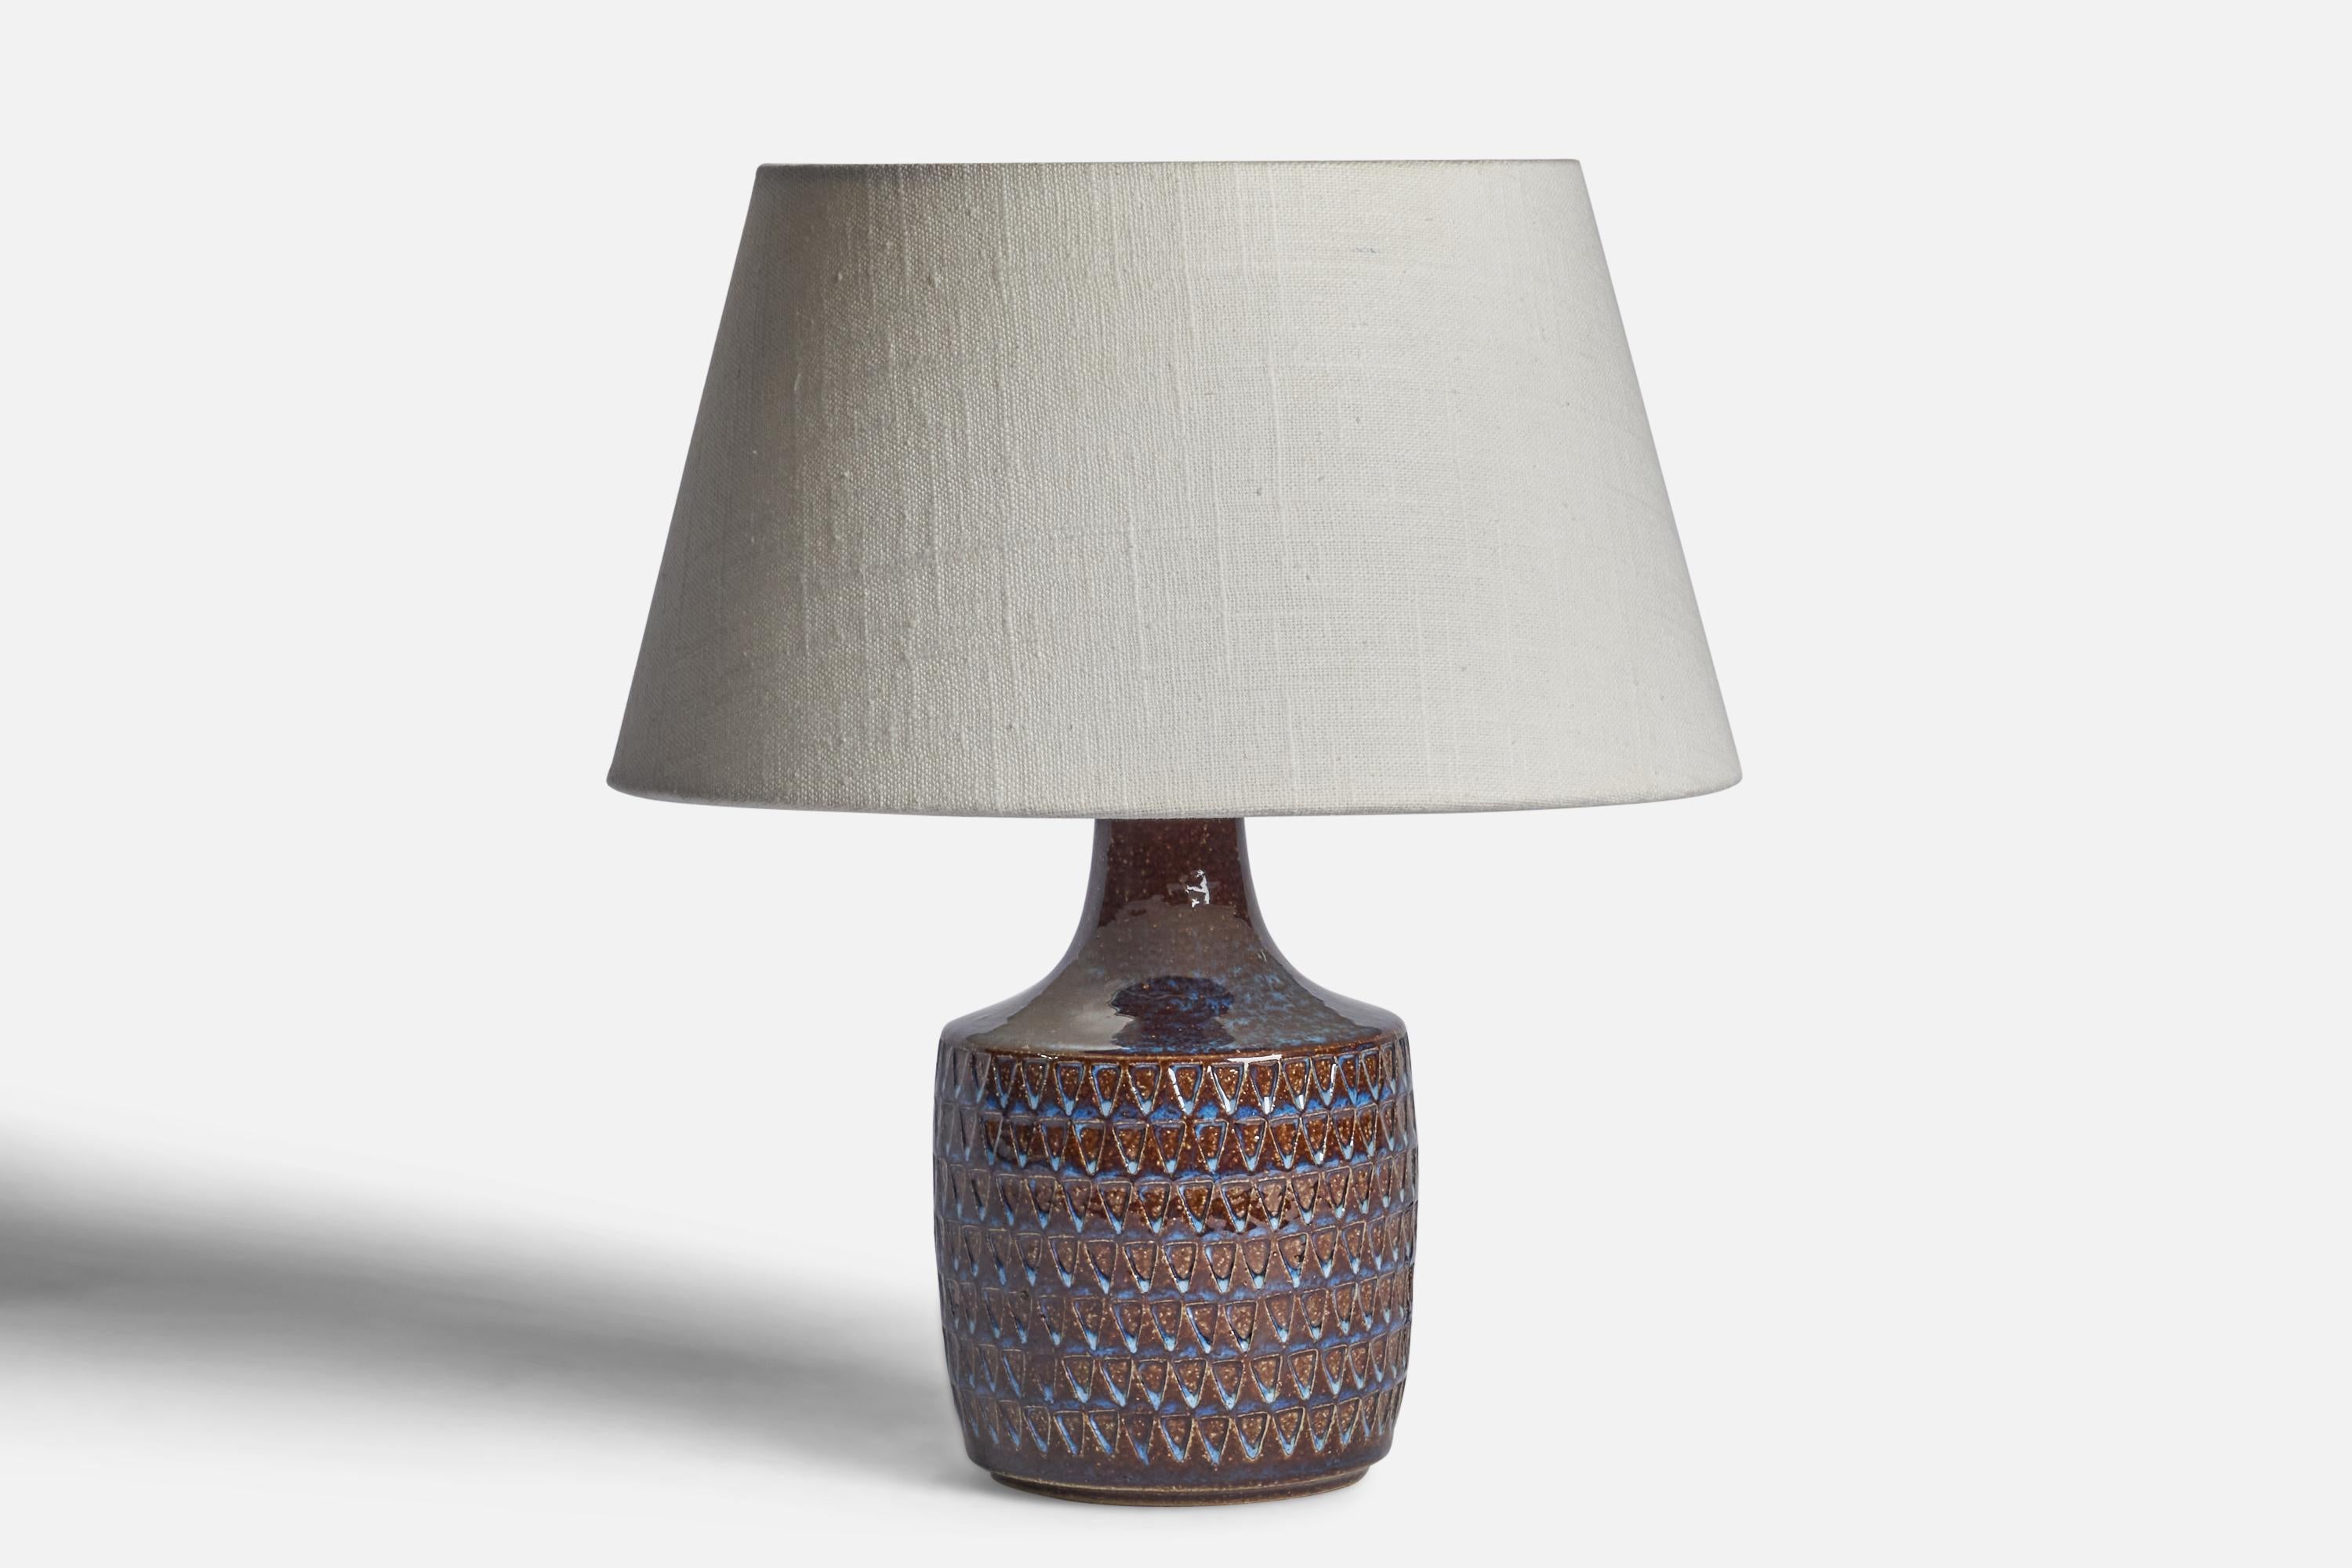 A blue and brown-glazed stoneware table lamp designed and produced by 
Søholm, Bornholm, Denmark, 1960s.

Dimensions of Lamp (inches): 8.65” H x 4.35” Diameter
Dimensions of Shade (inches): 7” Top Diameter x 10” Bottom Diameter x 5.5” H 
Dimensions